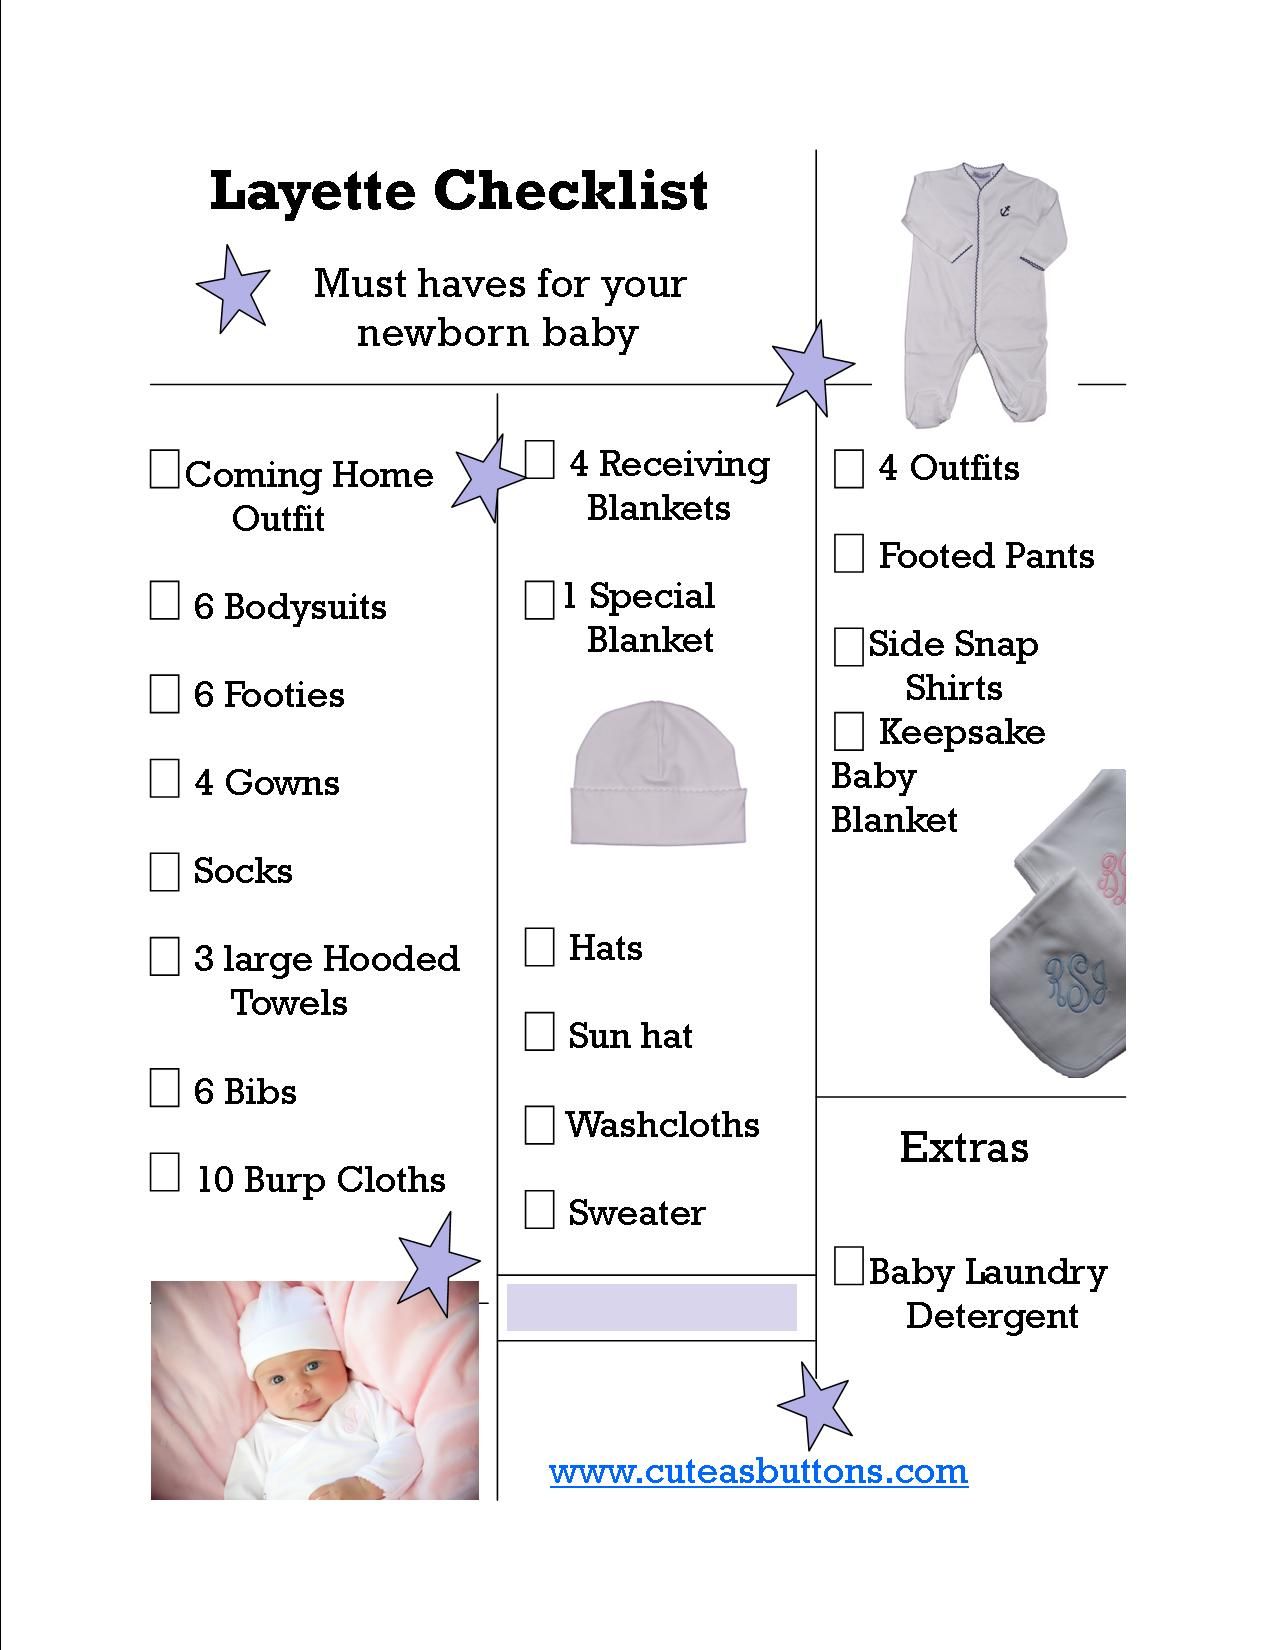 Layette Checklist: Having a baby? Here is a checklist of all the 